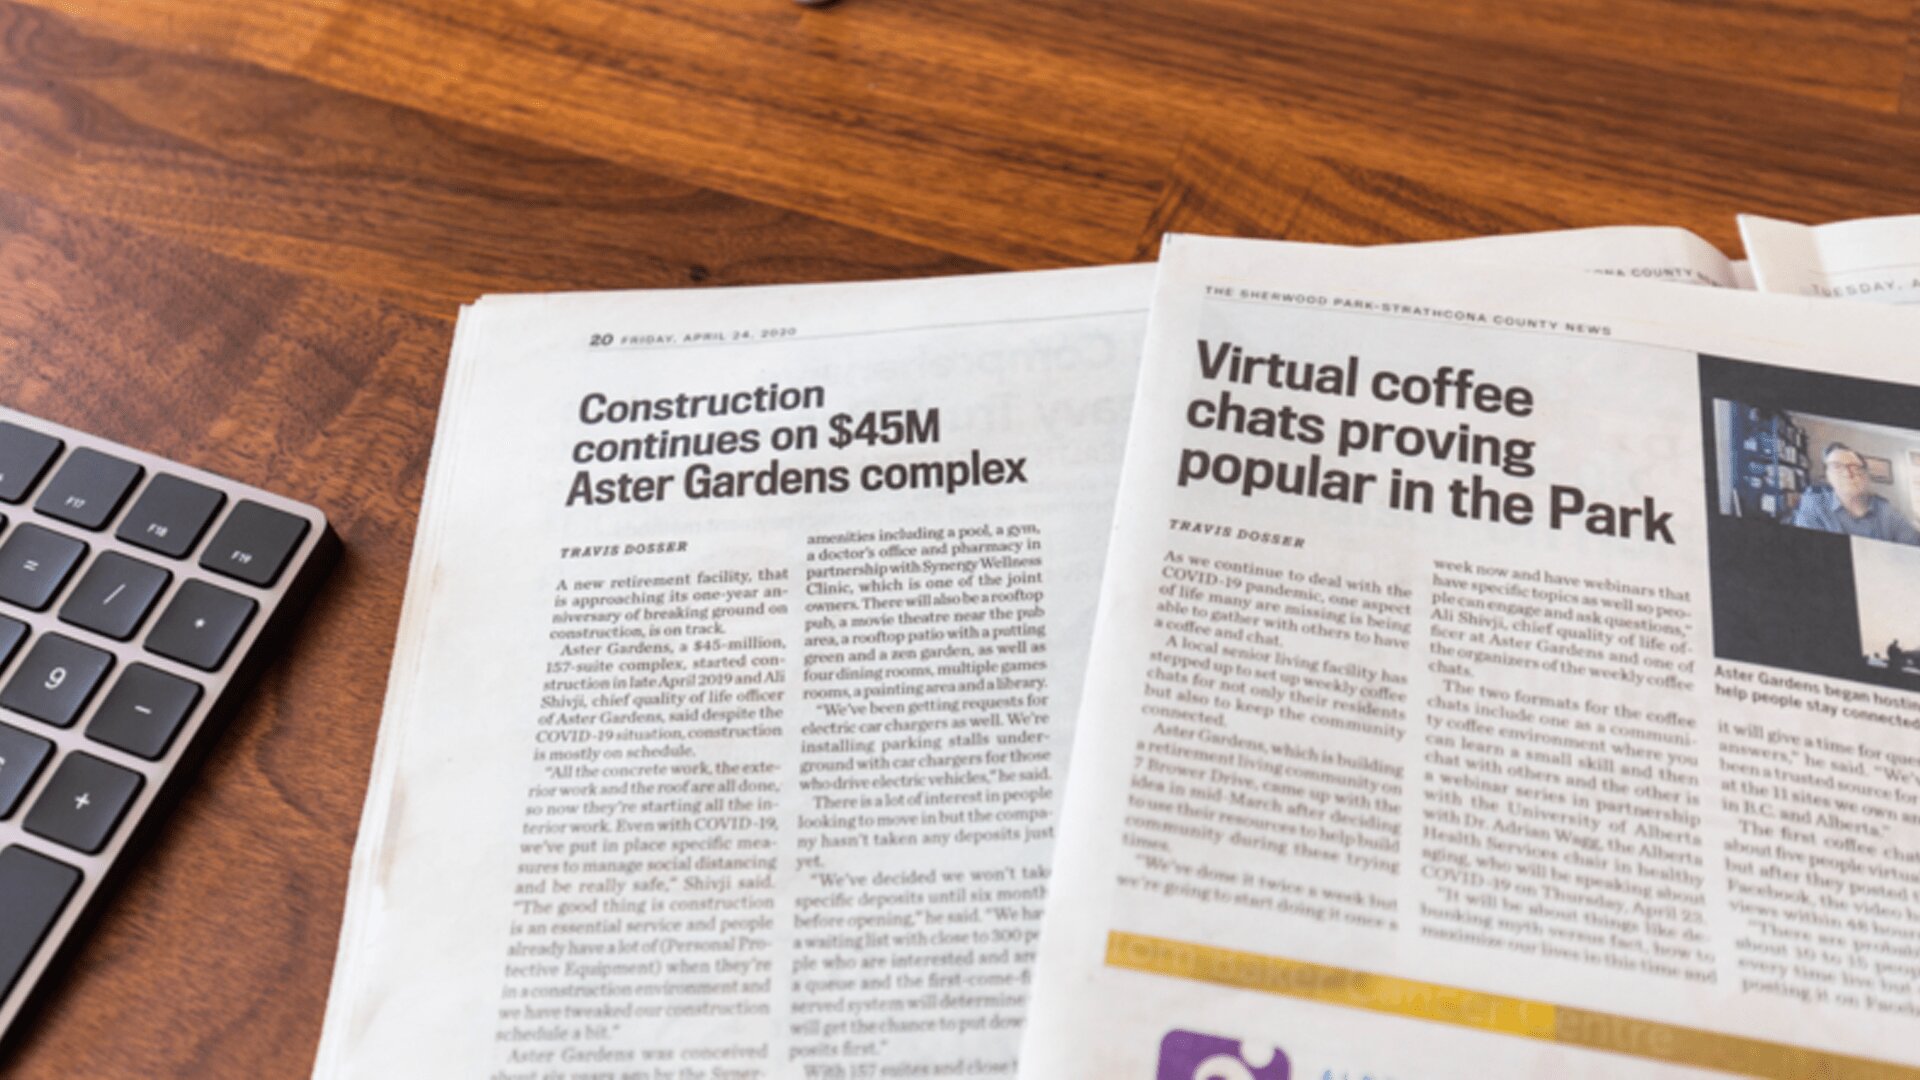 Article of Aster Gardens in a newspaper